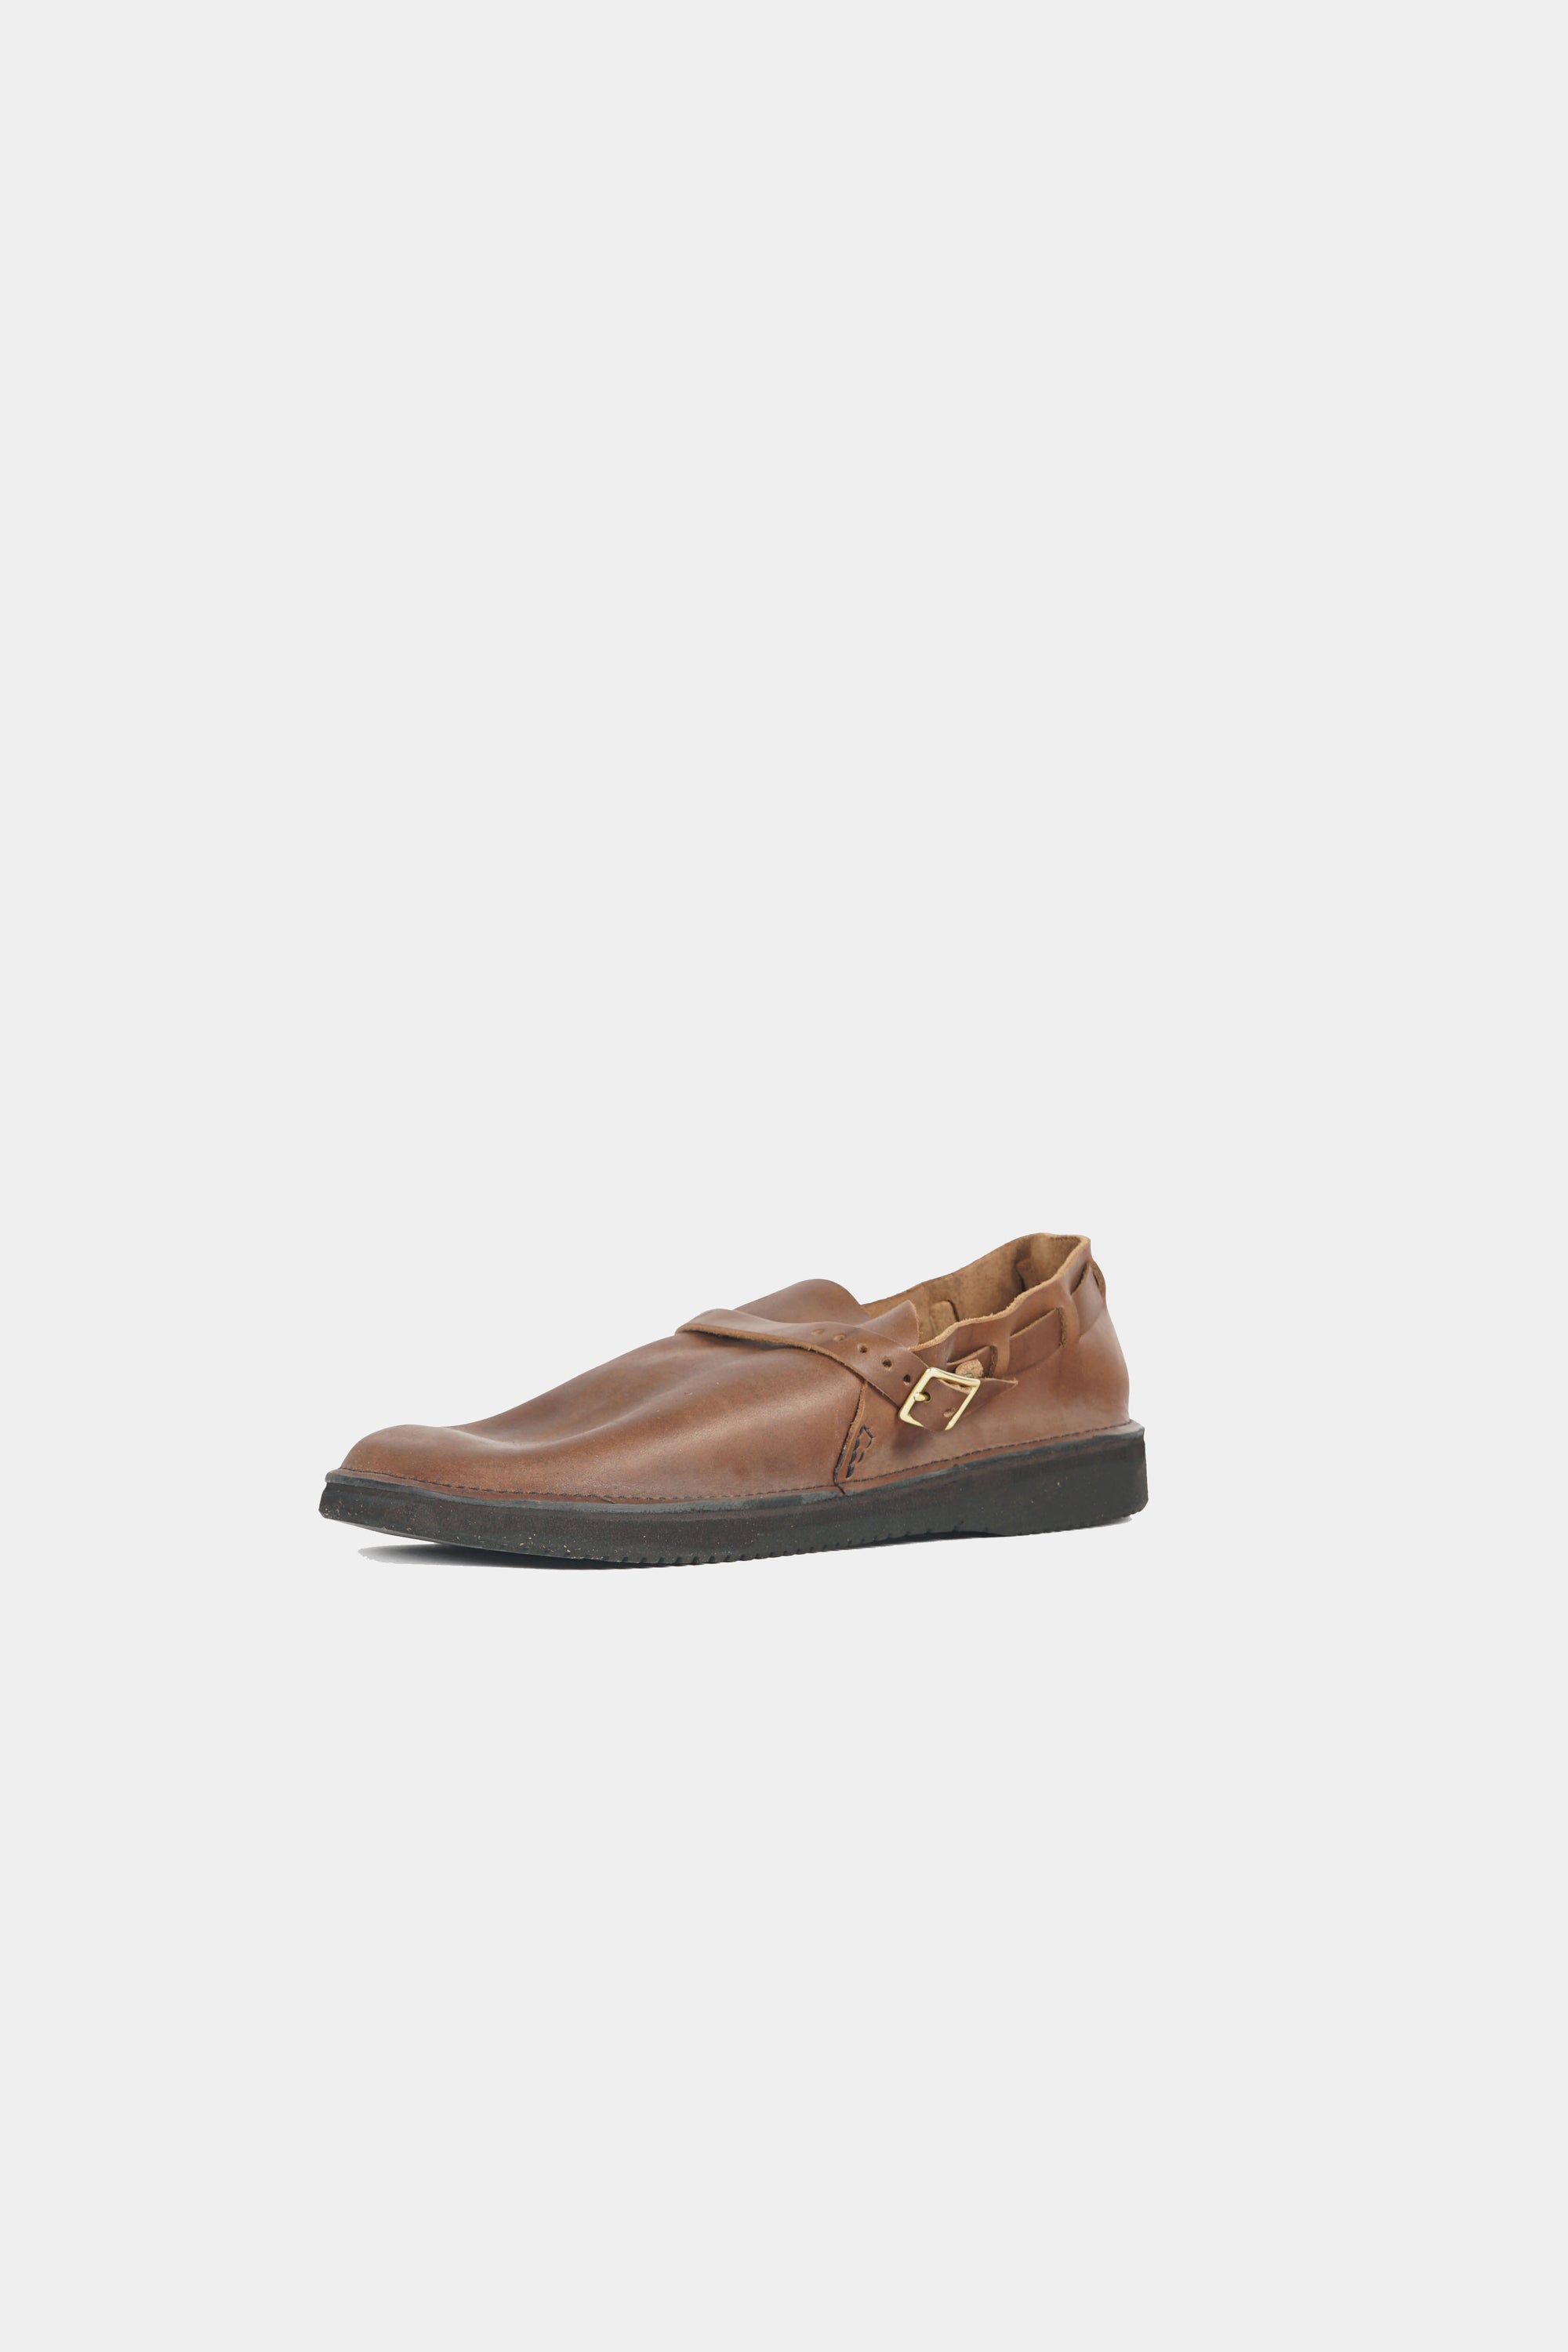 Mens Middle English Brown